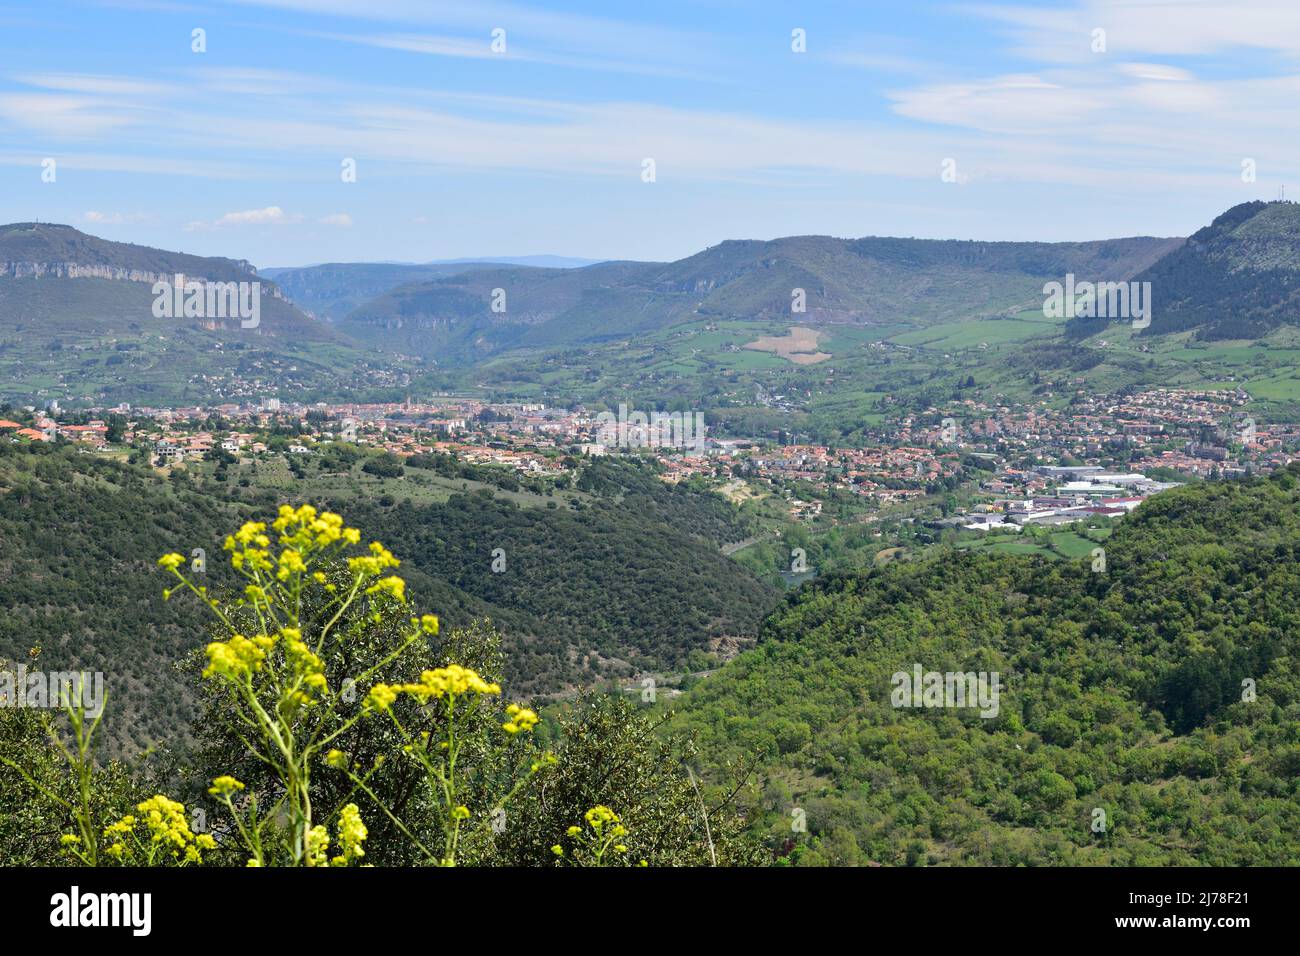 A stunning view of Millau village in the Occitanie region of France Stock Photo